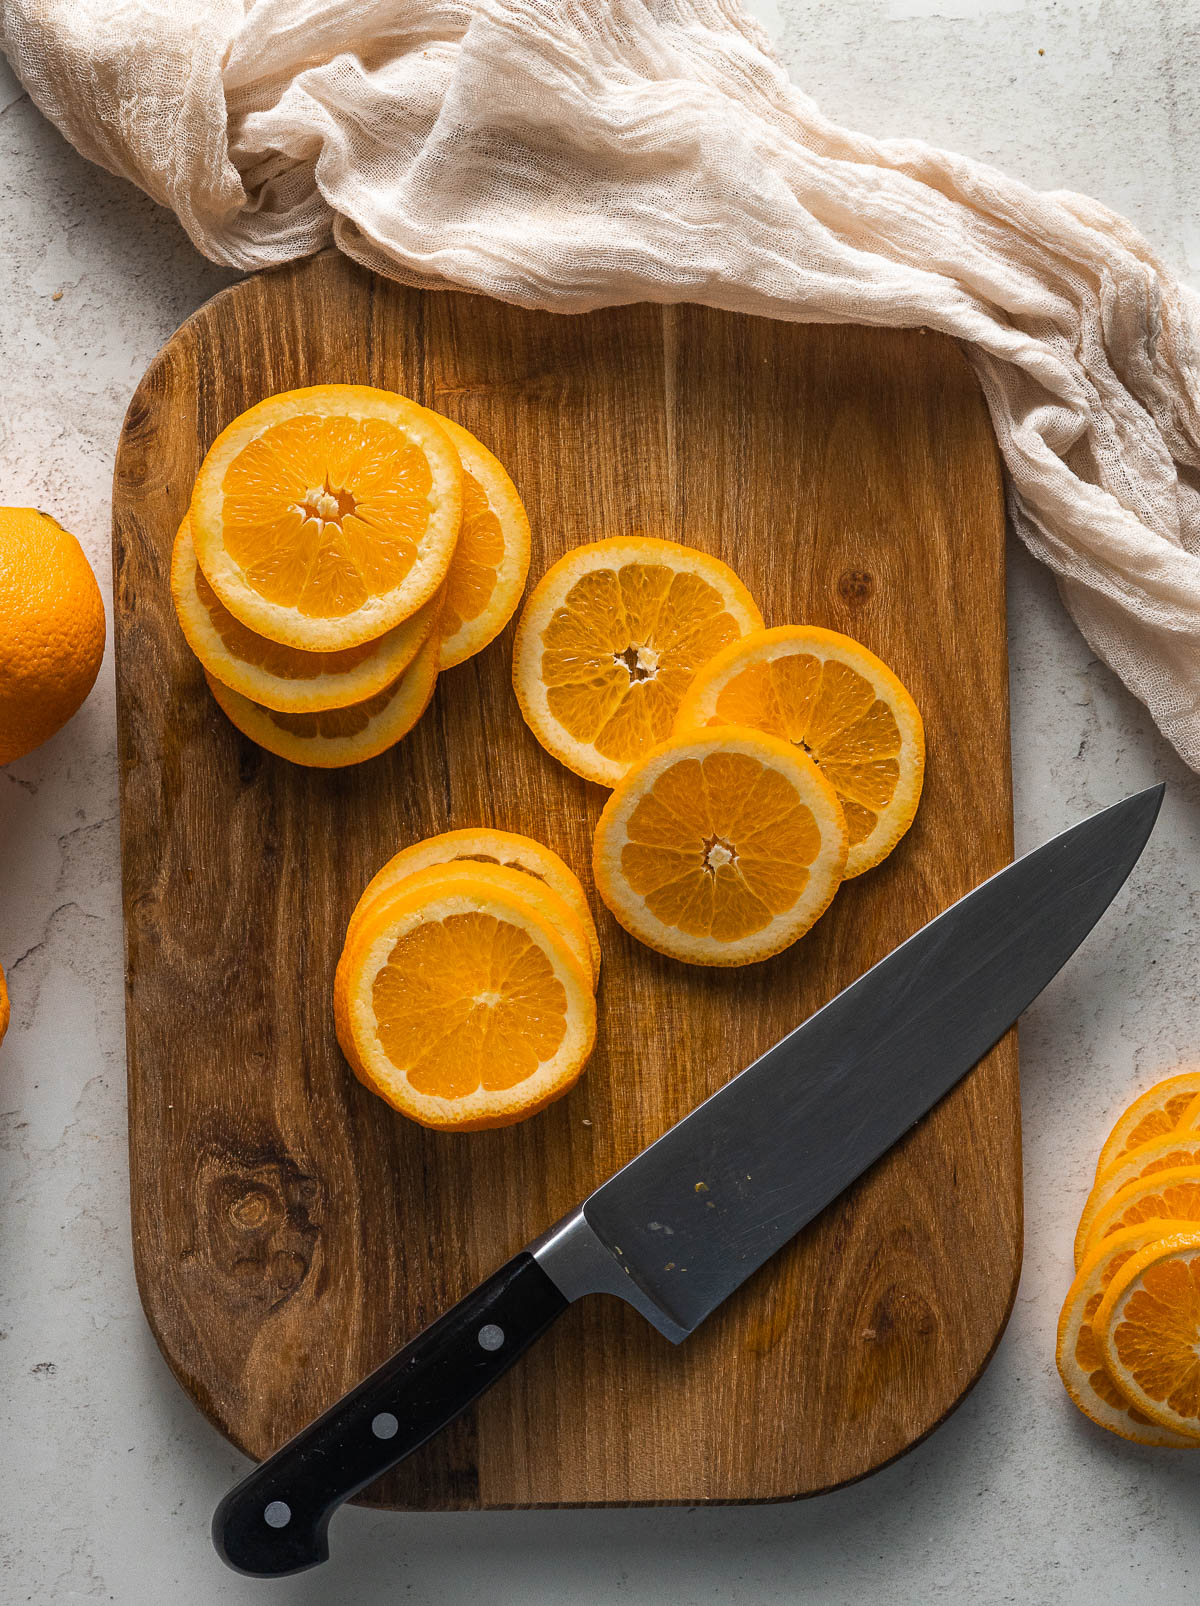 Fresh navel oranges being sliced for the dried orange slices